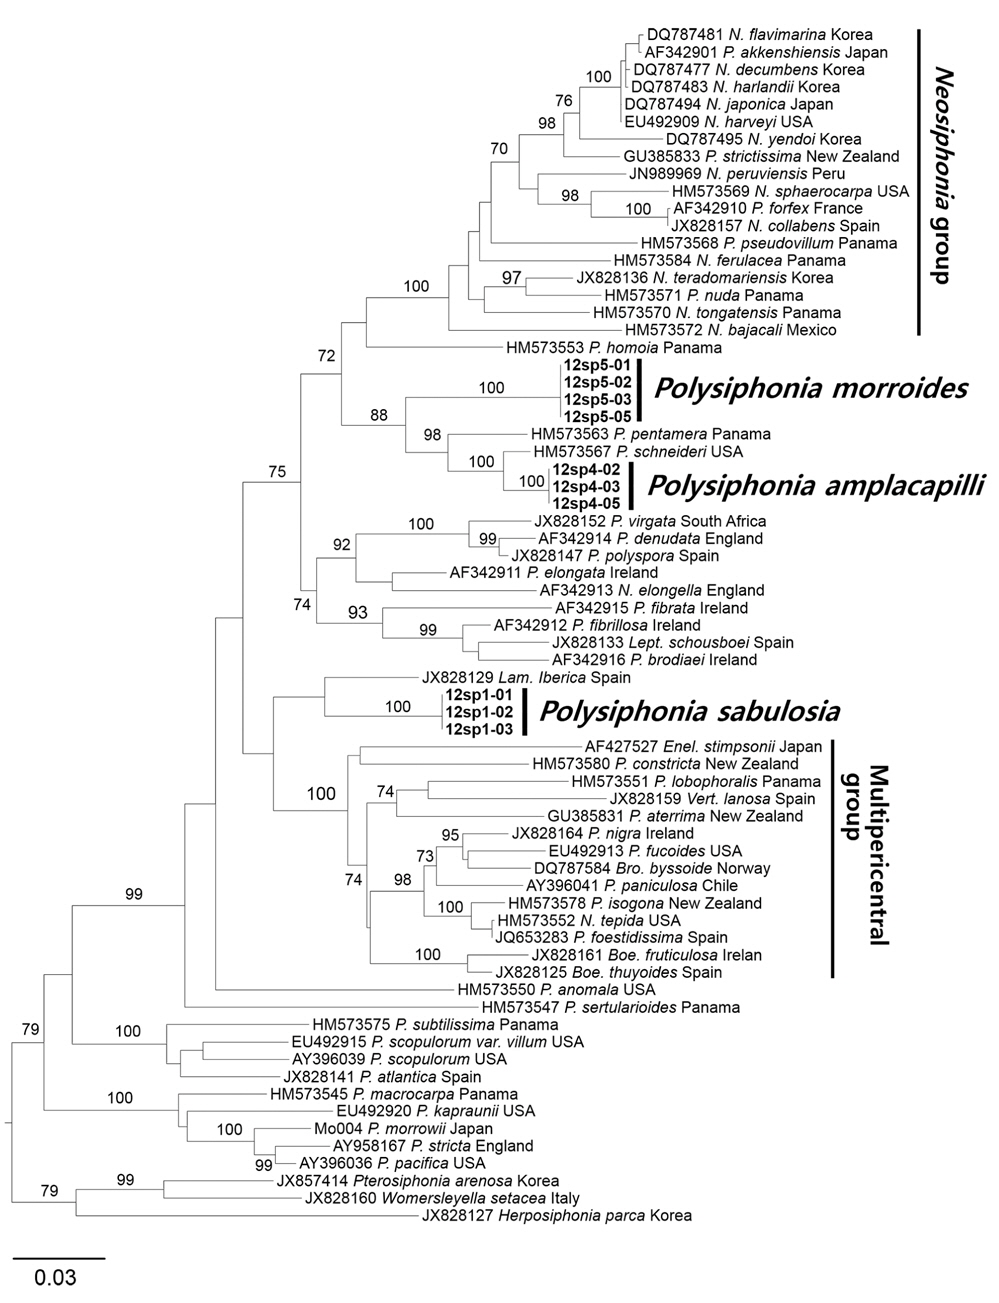 Maximum likelihood (ML) phylogenetic tree (log likelihood = -13,933.281096) for Polysiphonia sensu lato and outgroups derived from rbcL sequences. The ML bootstrap values (1,000 replicates) are shown above the branches.